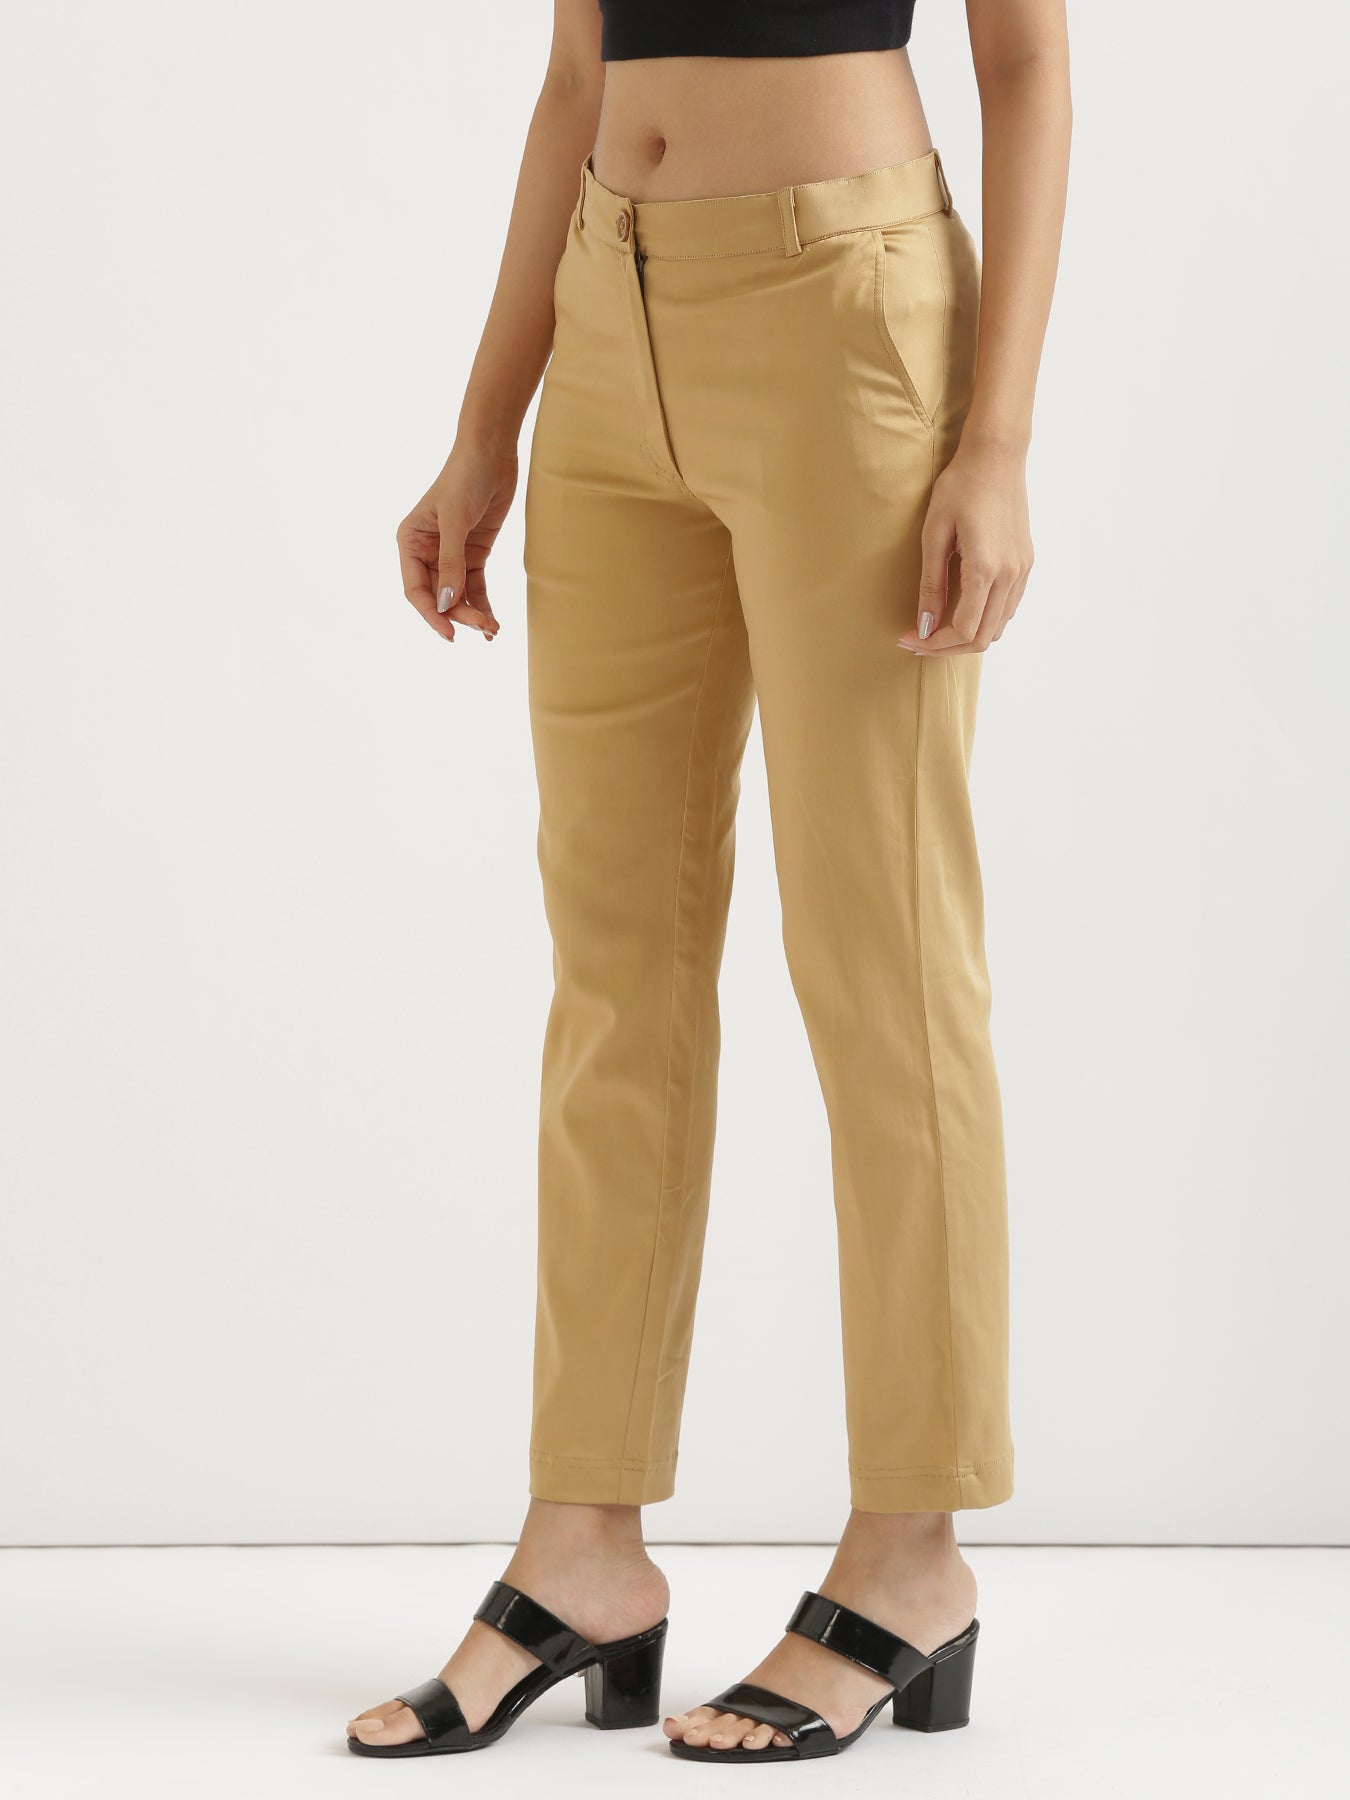 Pin by My Way on C | High waisted pants outfit, Formal pants women, High  waist outfits